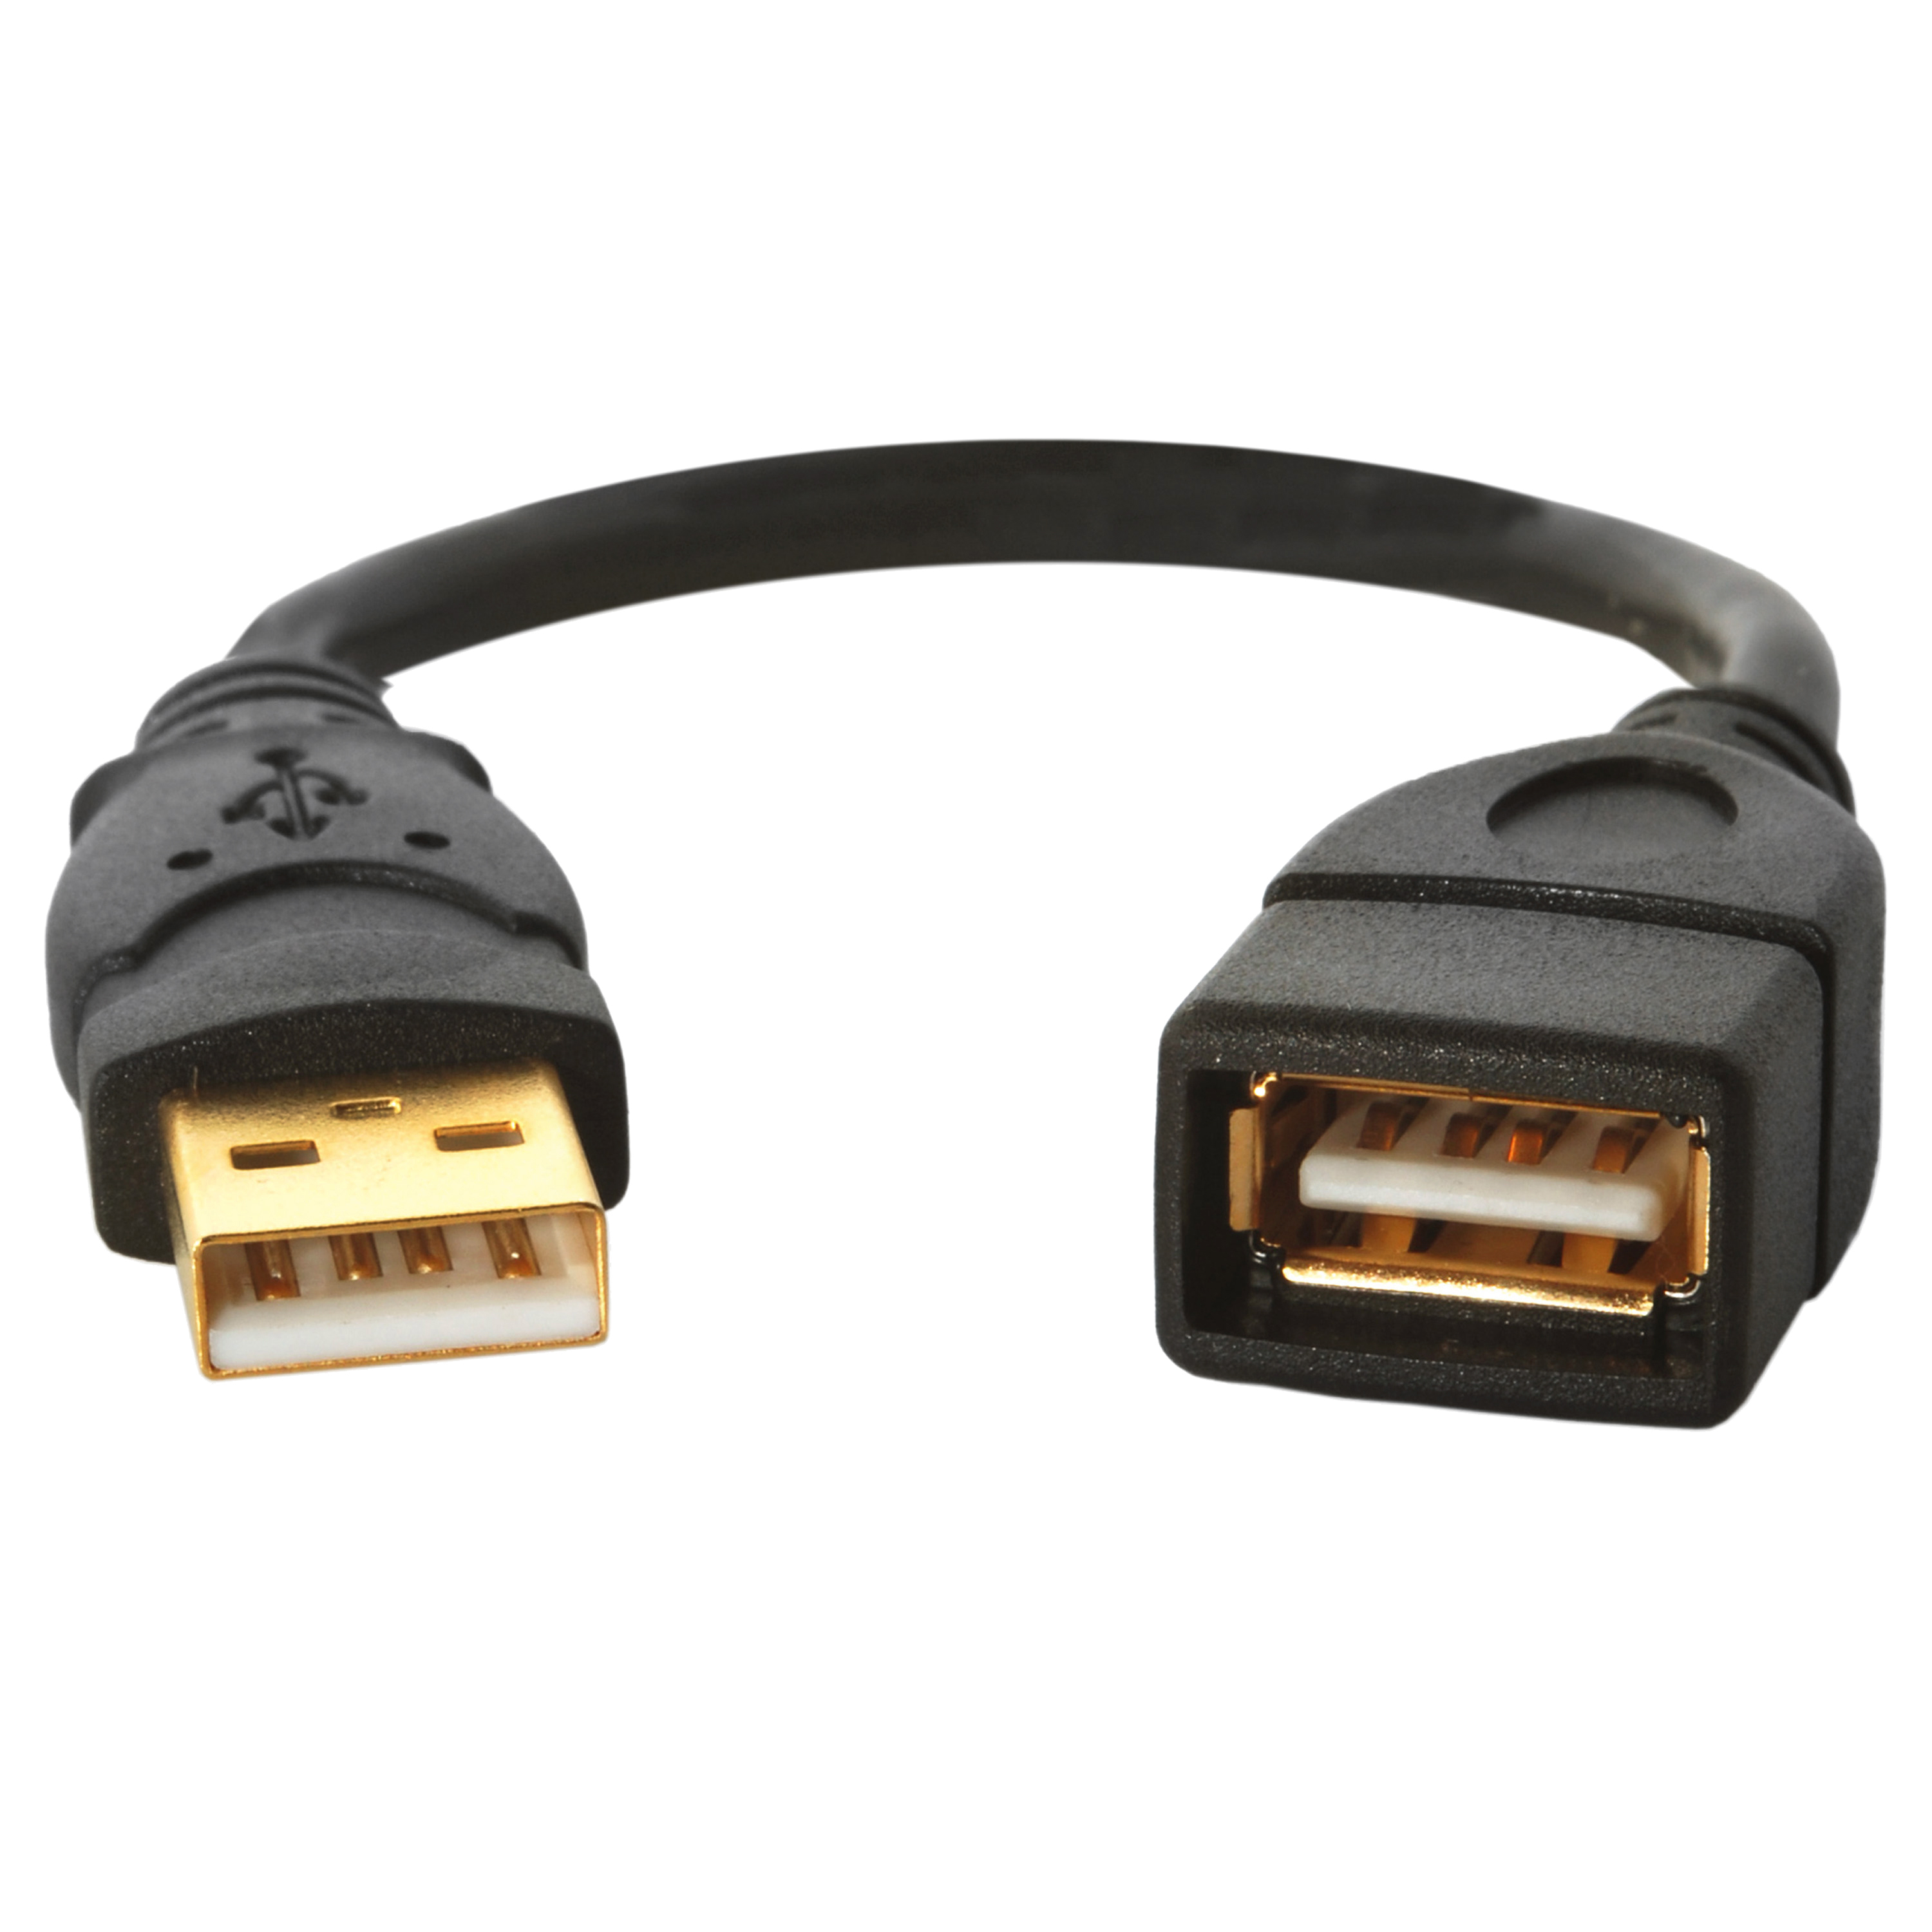 Usb Connector Cable Hd